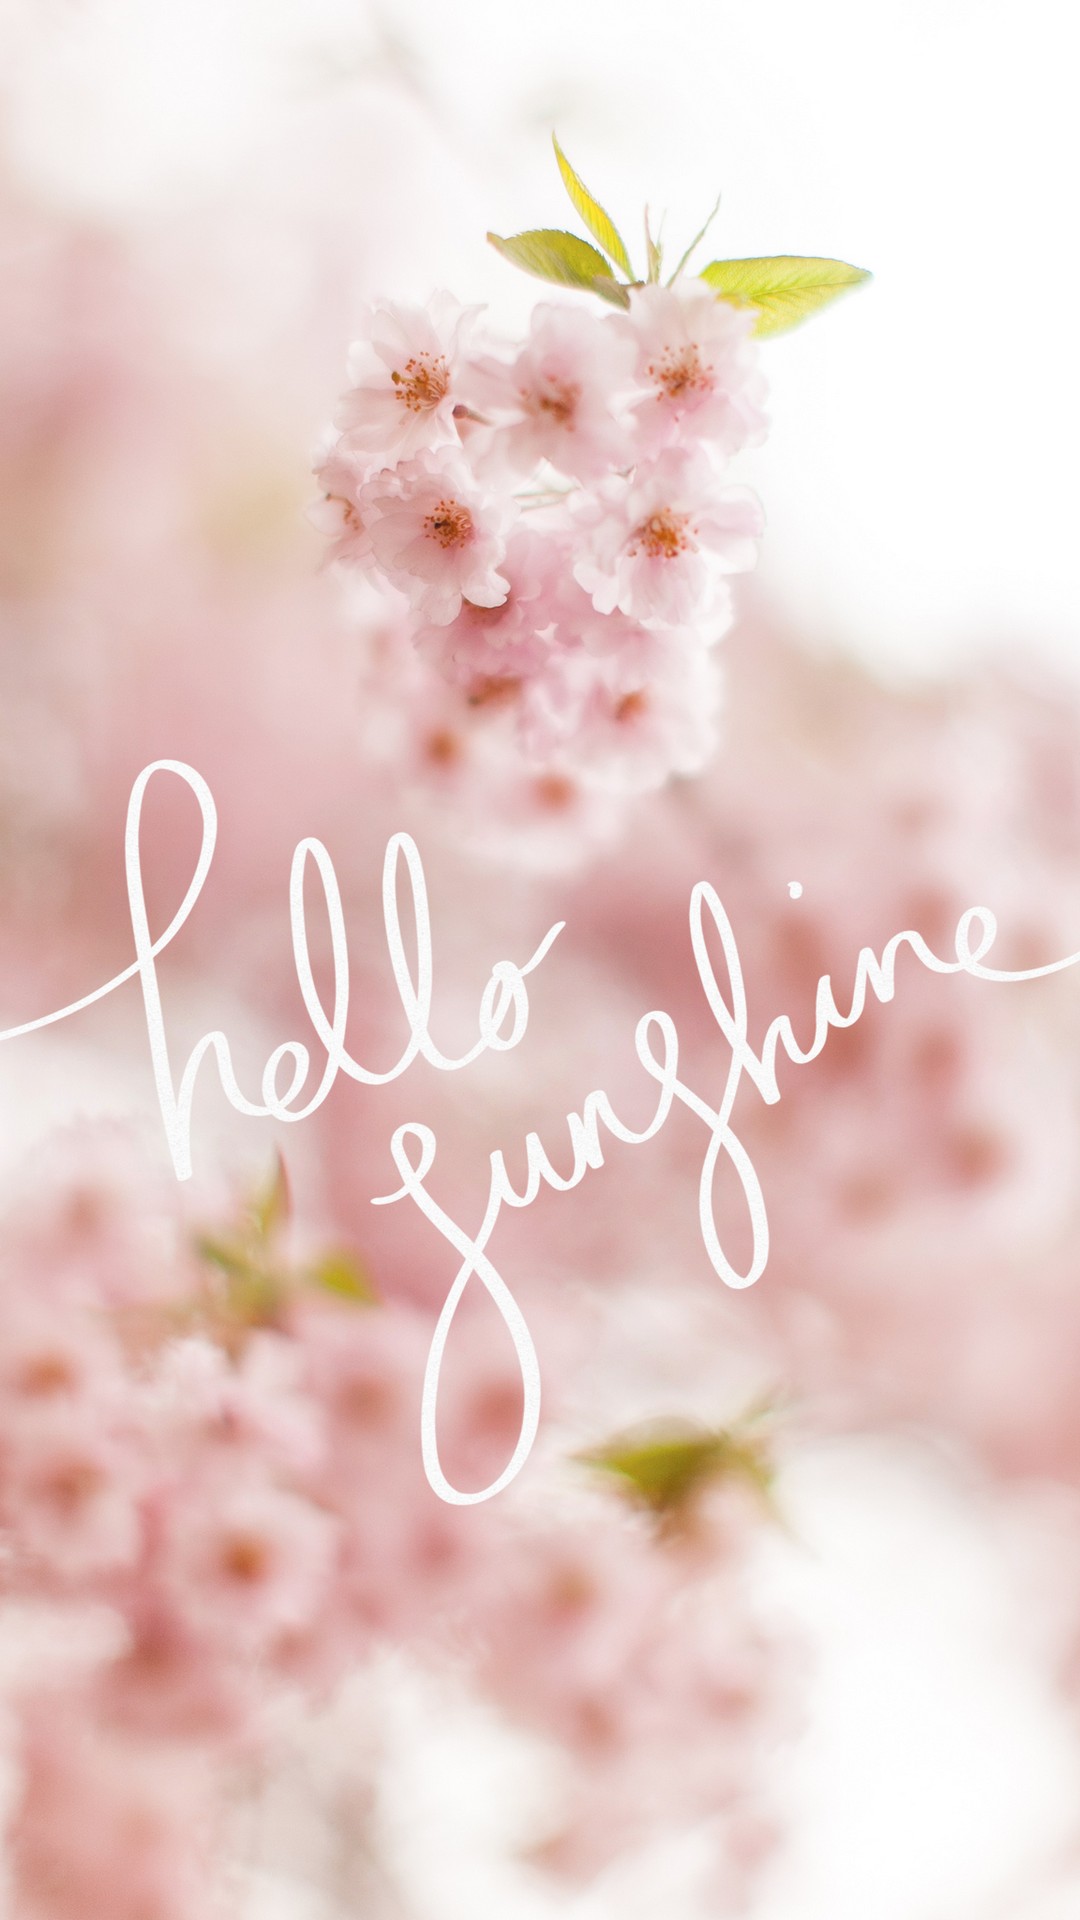 Cute Spring HD Wallpapers For Android with HD resolution 1080x1920